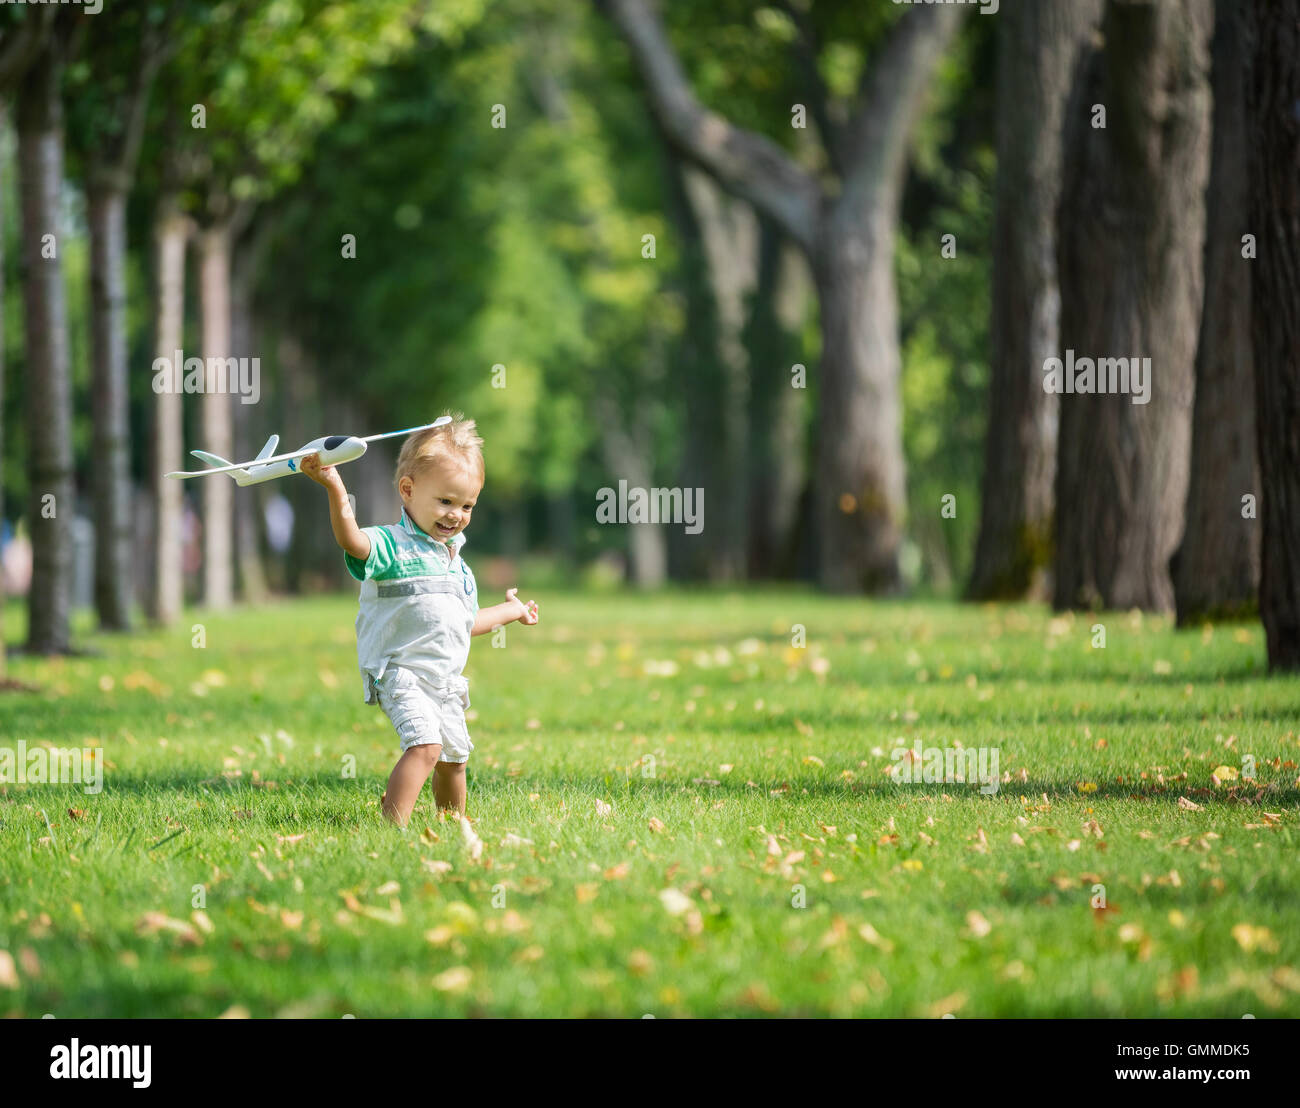 Toddler boy playing with toy glider in park on summer day Stock Photo